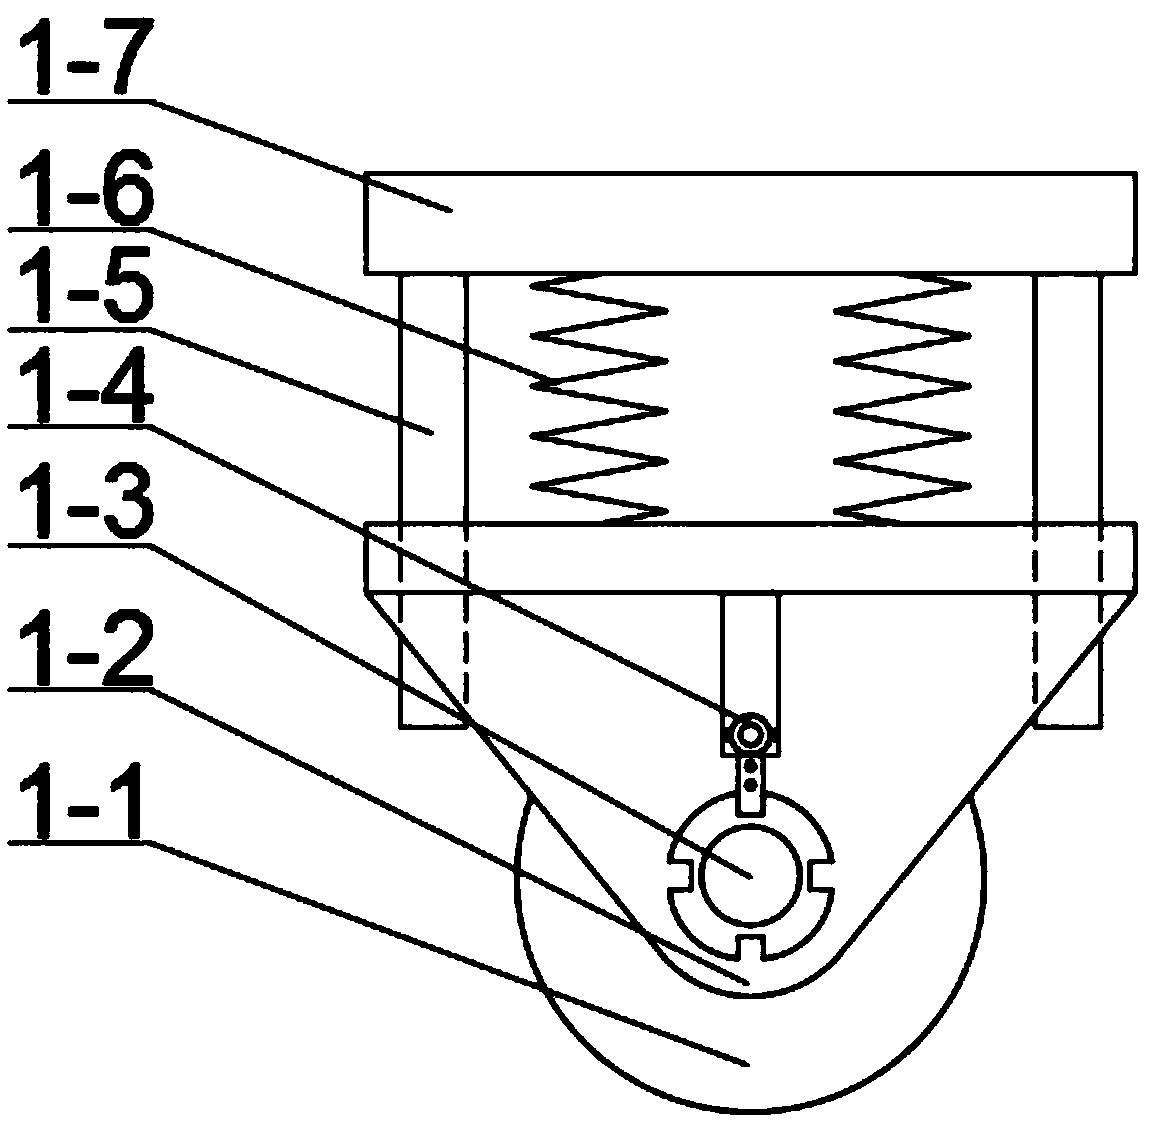 Stirring device for dyes applied to textile threads